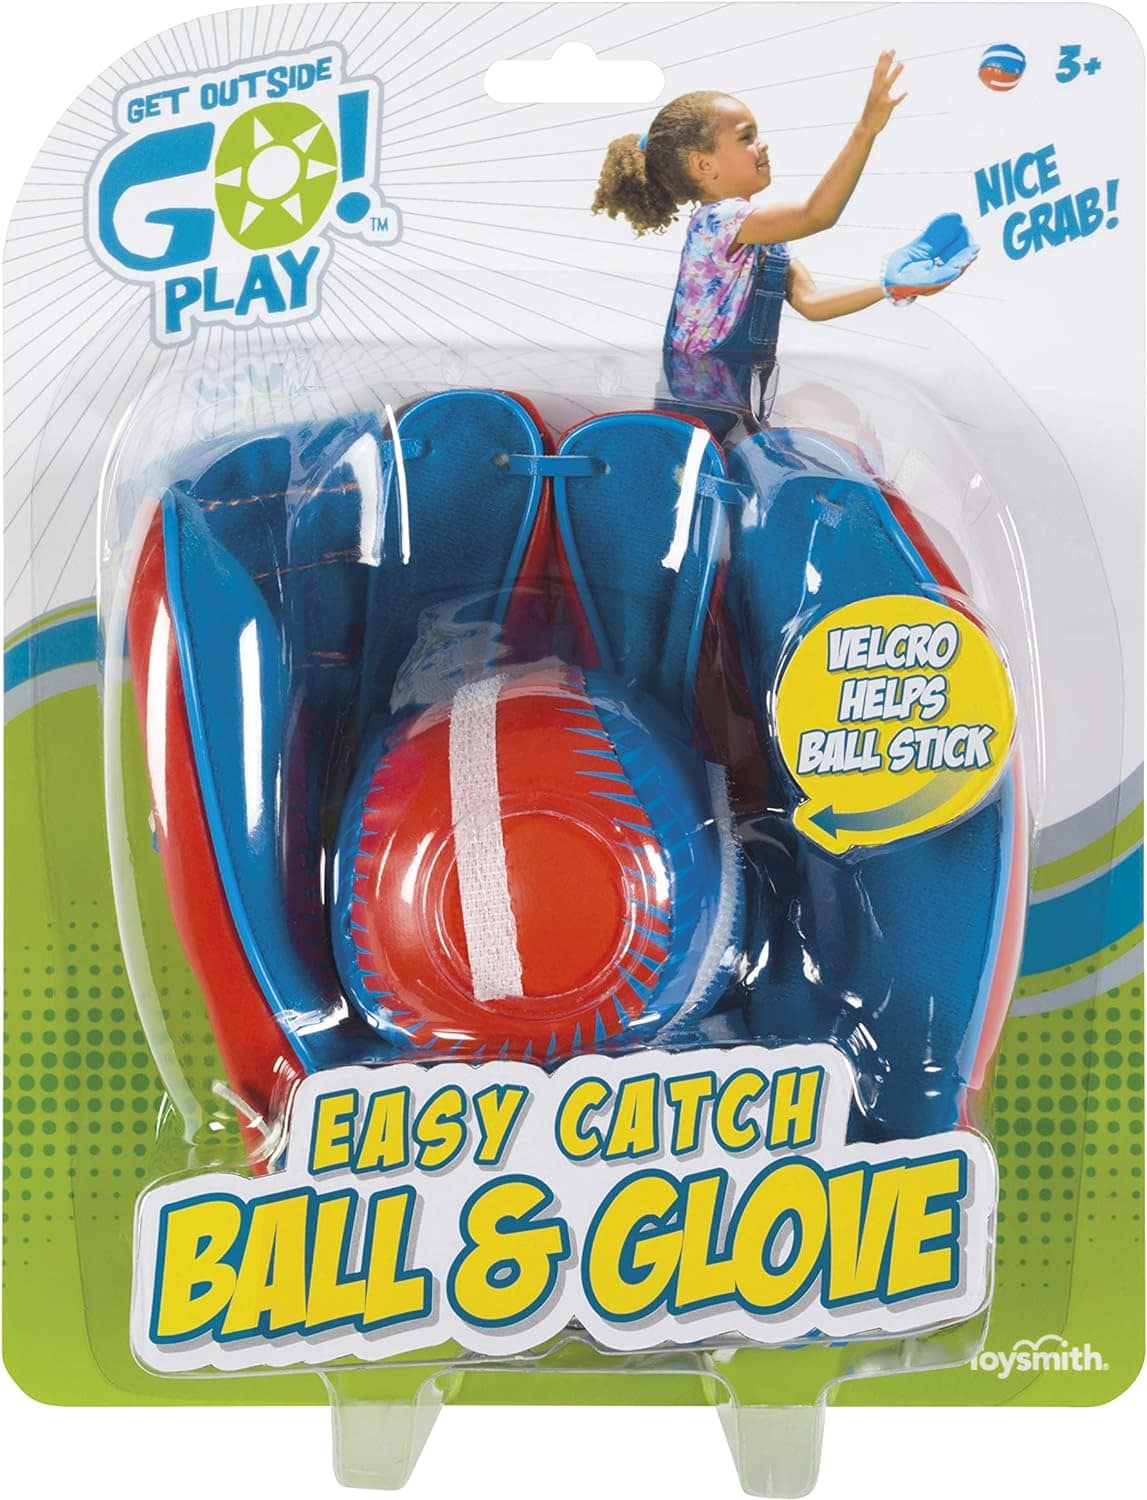 ball and glove set for kids